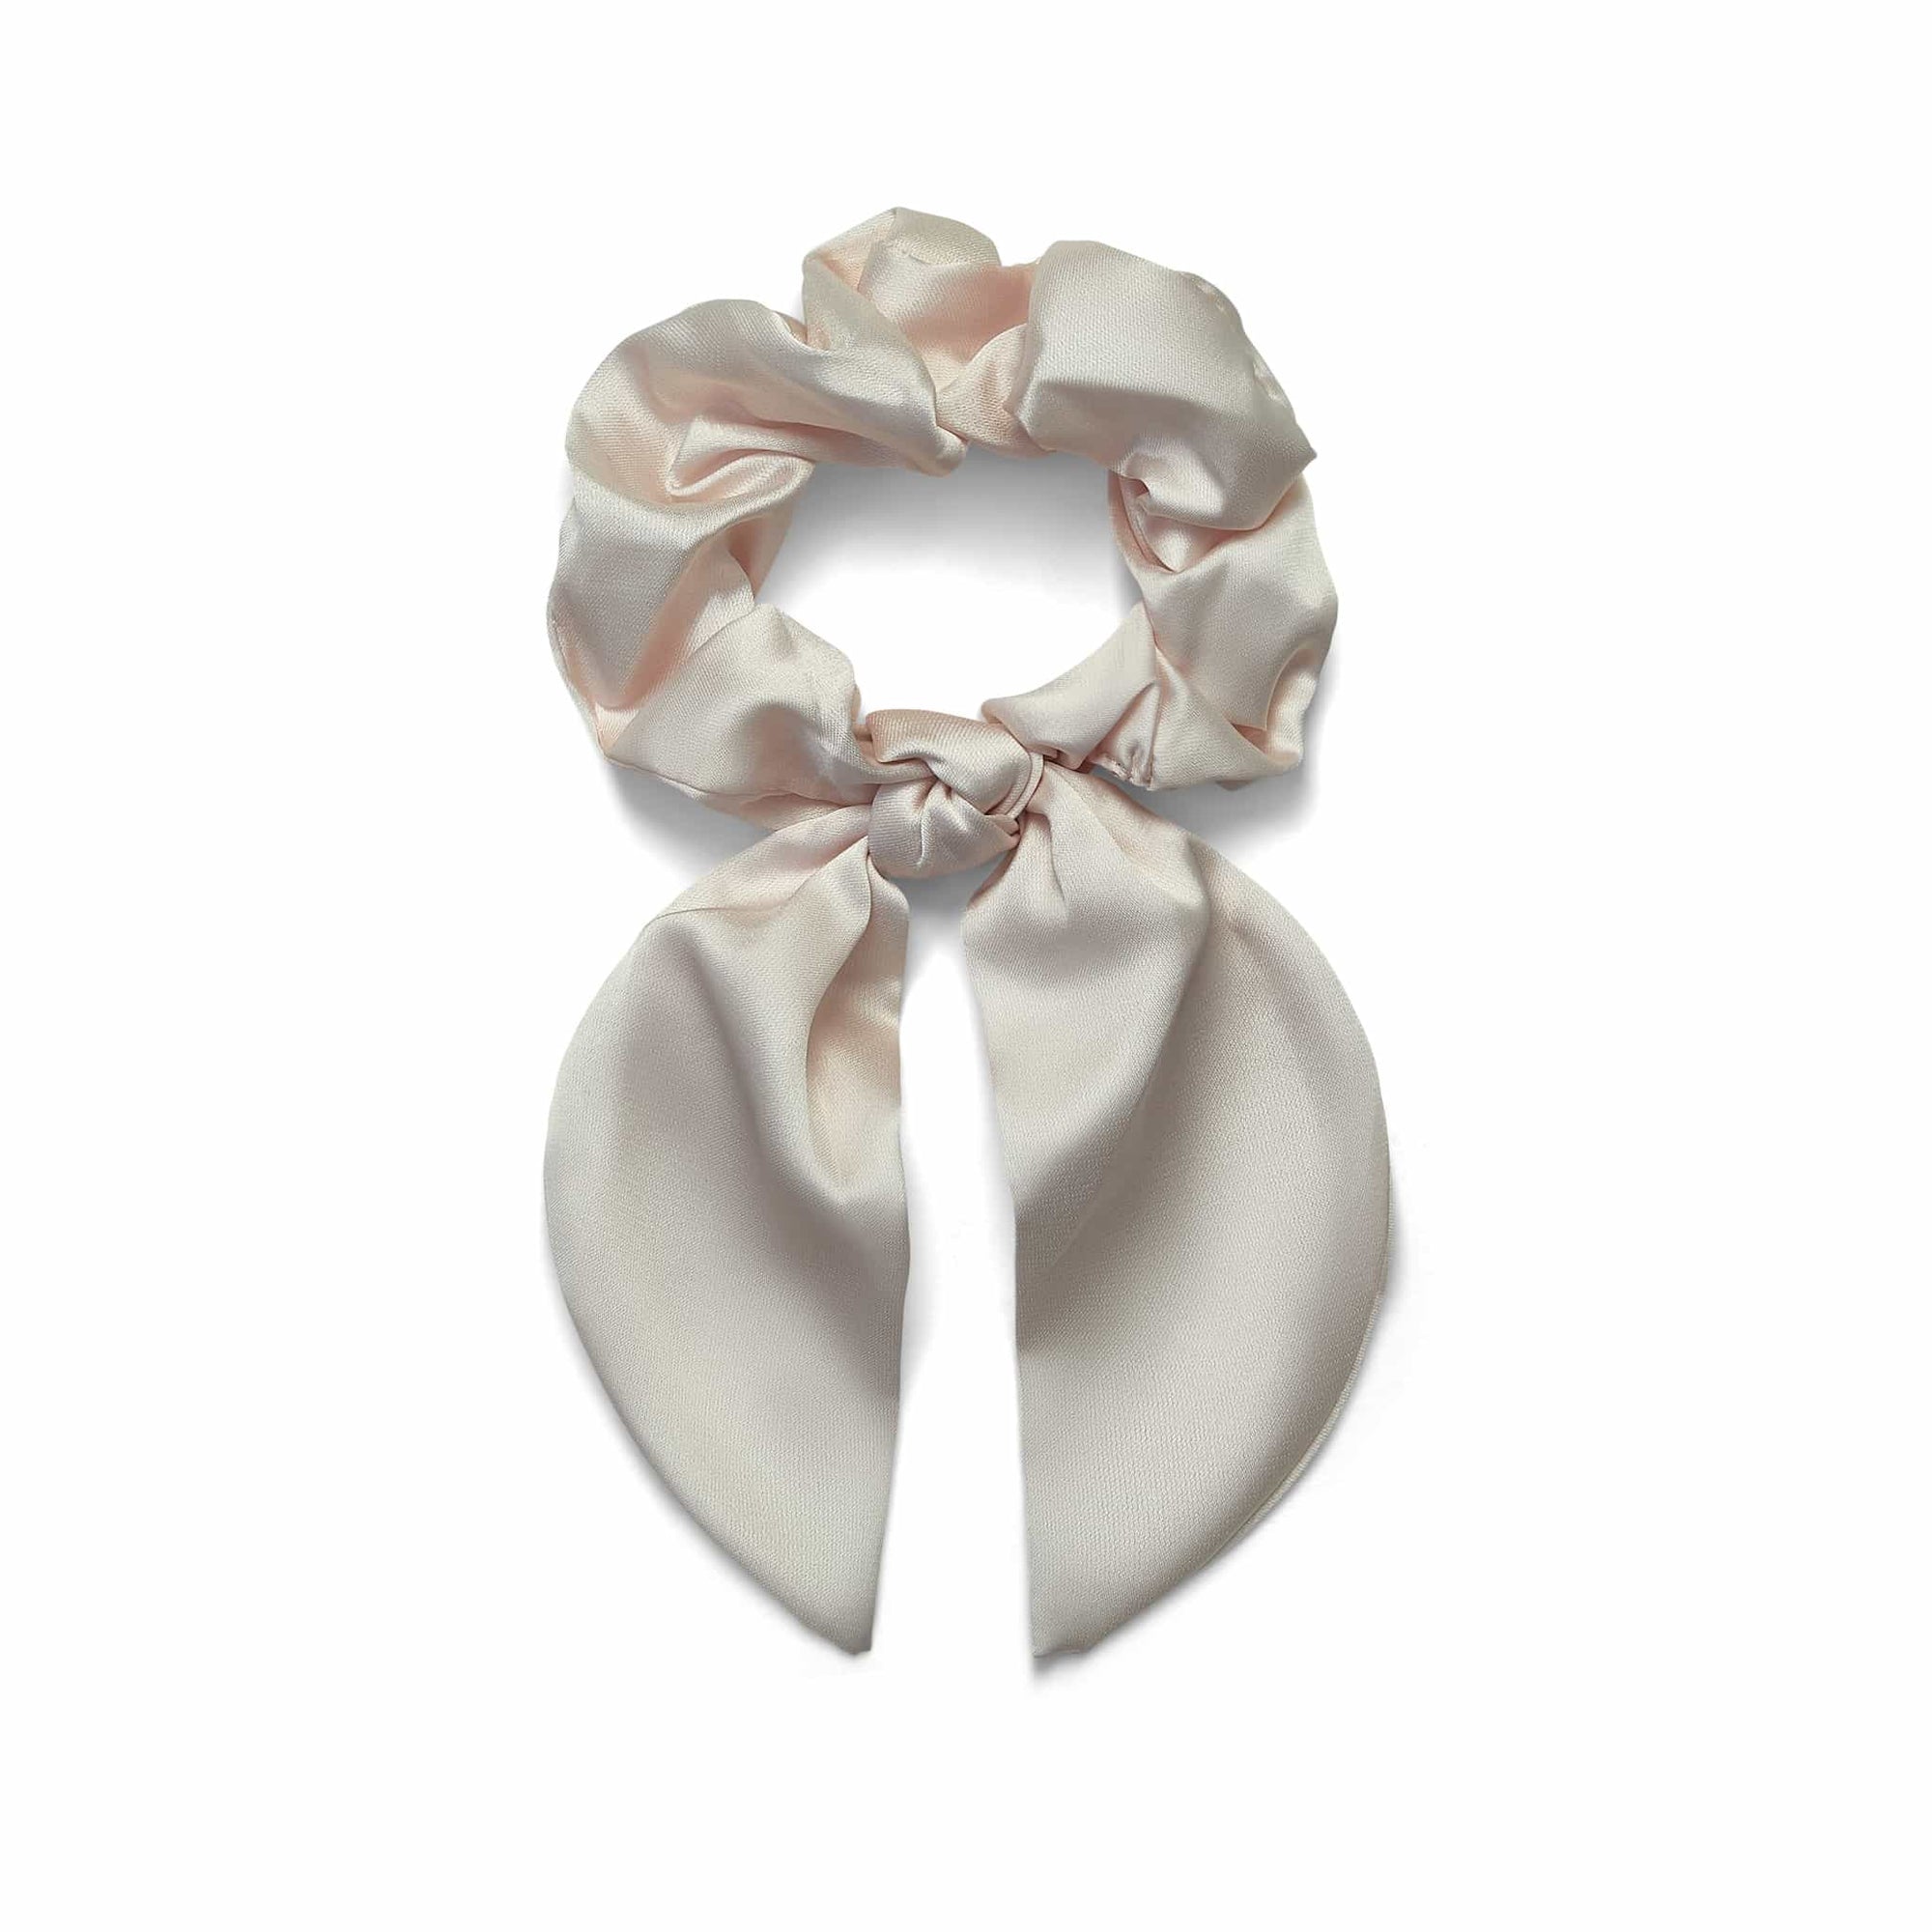 Only Curls Satin Scarf Scrunchie - Pink - Only Curls